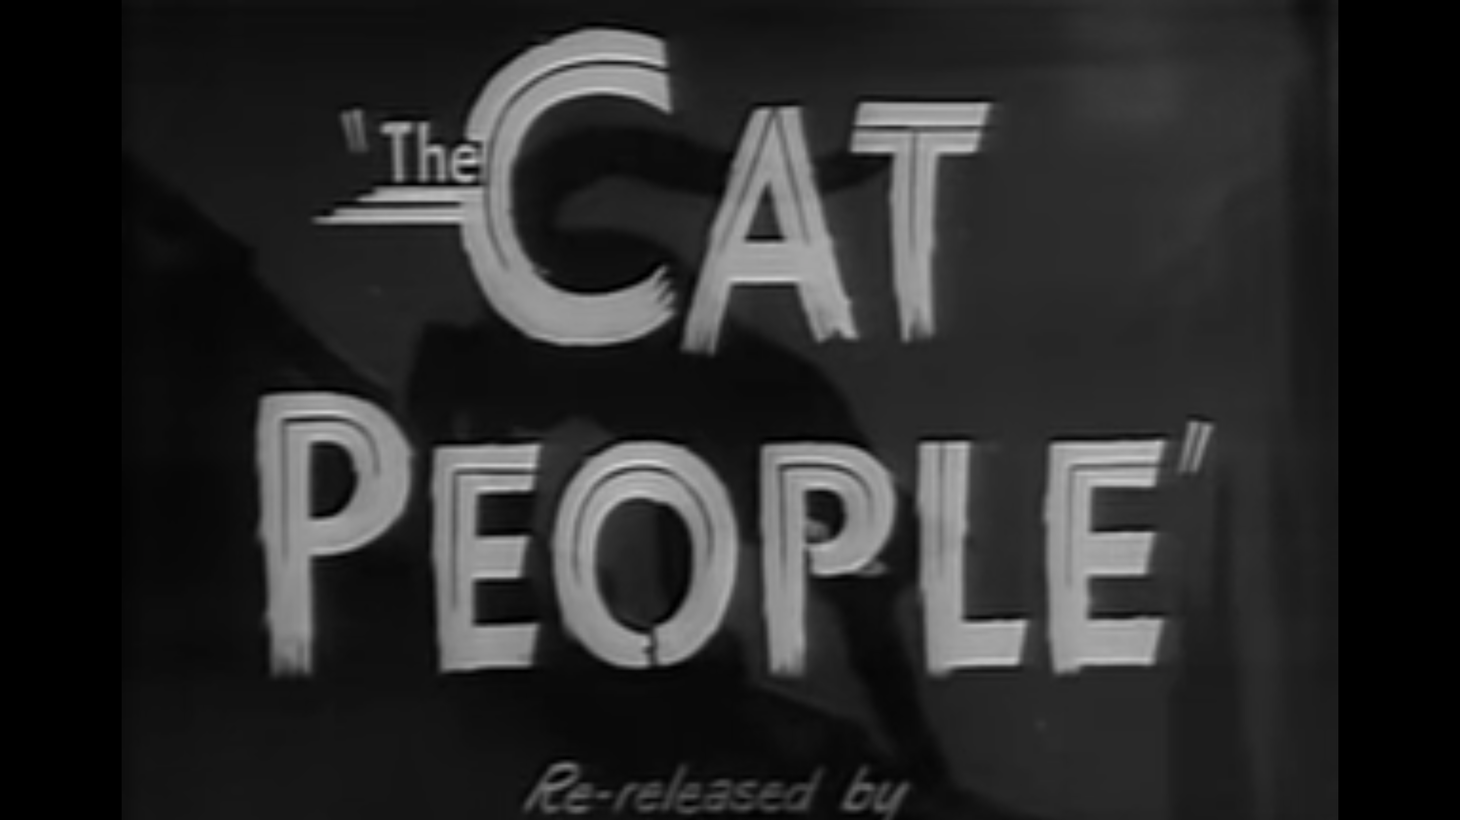 “When this movie originally came out, the general vibe was, ‘Oh, it's so scary that this woman is so unavailable and mysterious. And oh, will this guy survive having married this horrible ice queen?’ Well nowadays … this is actually a really potent queer analog,” film critic William Bibbiani says of “Cat People.”